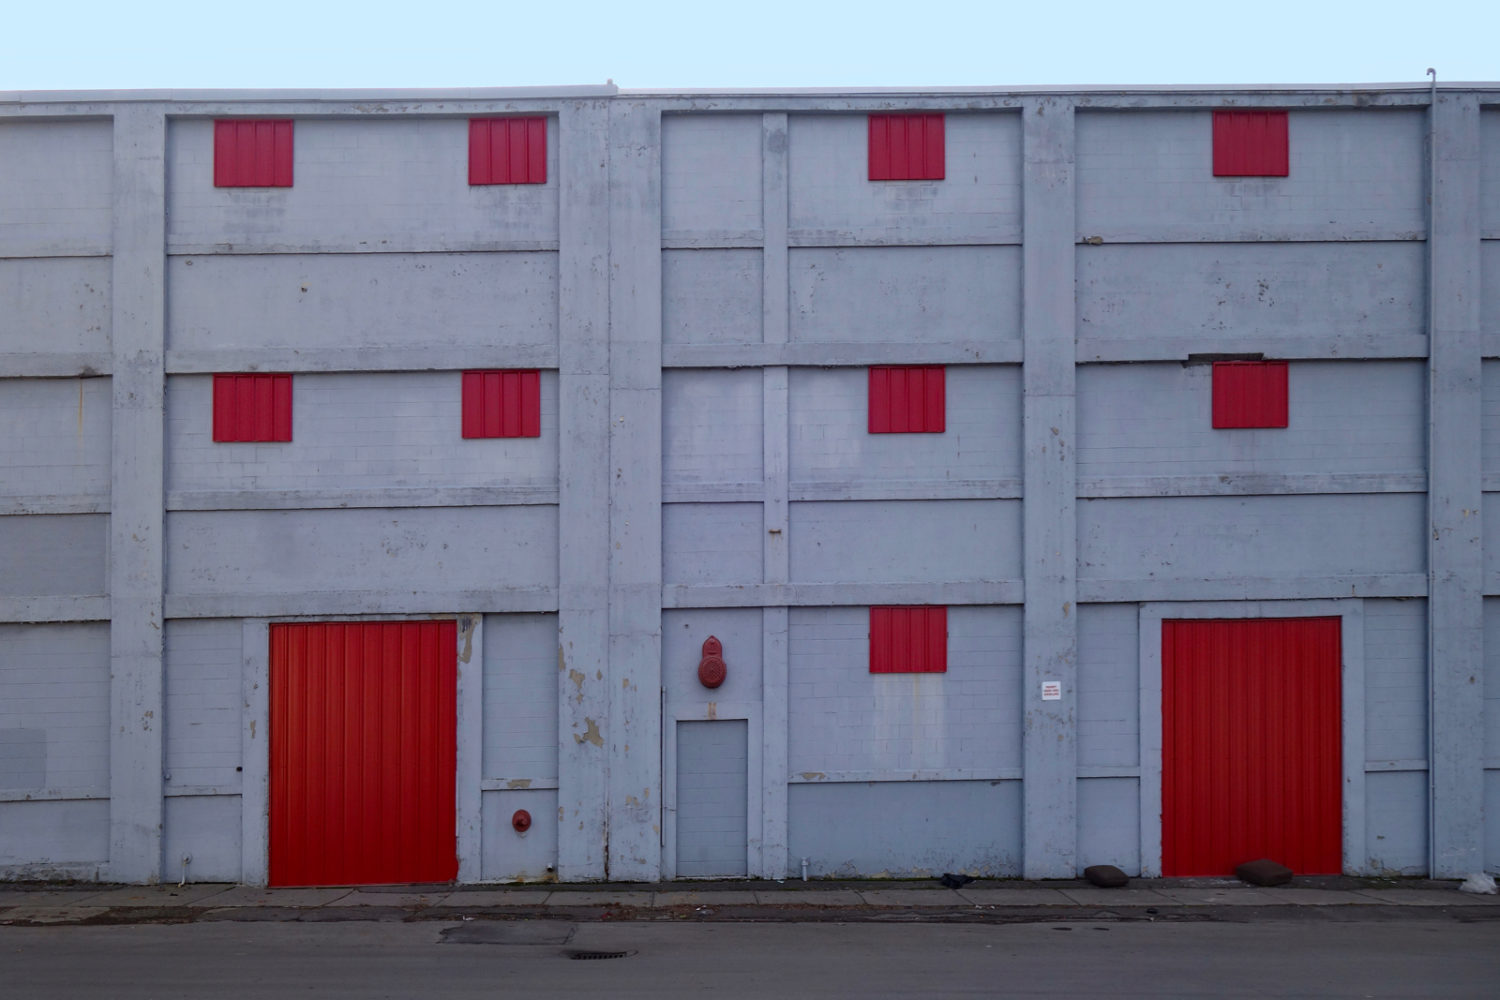 Red and gray building across the street from Saxon Studio near the Public Market